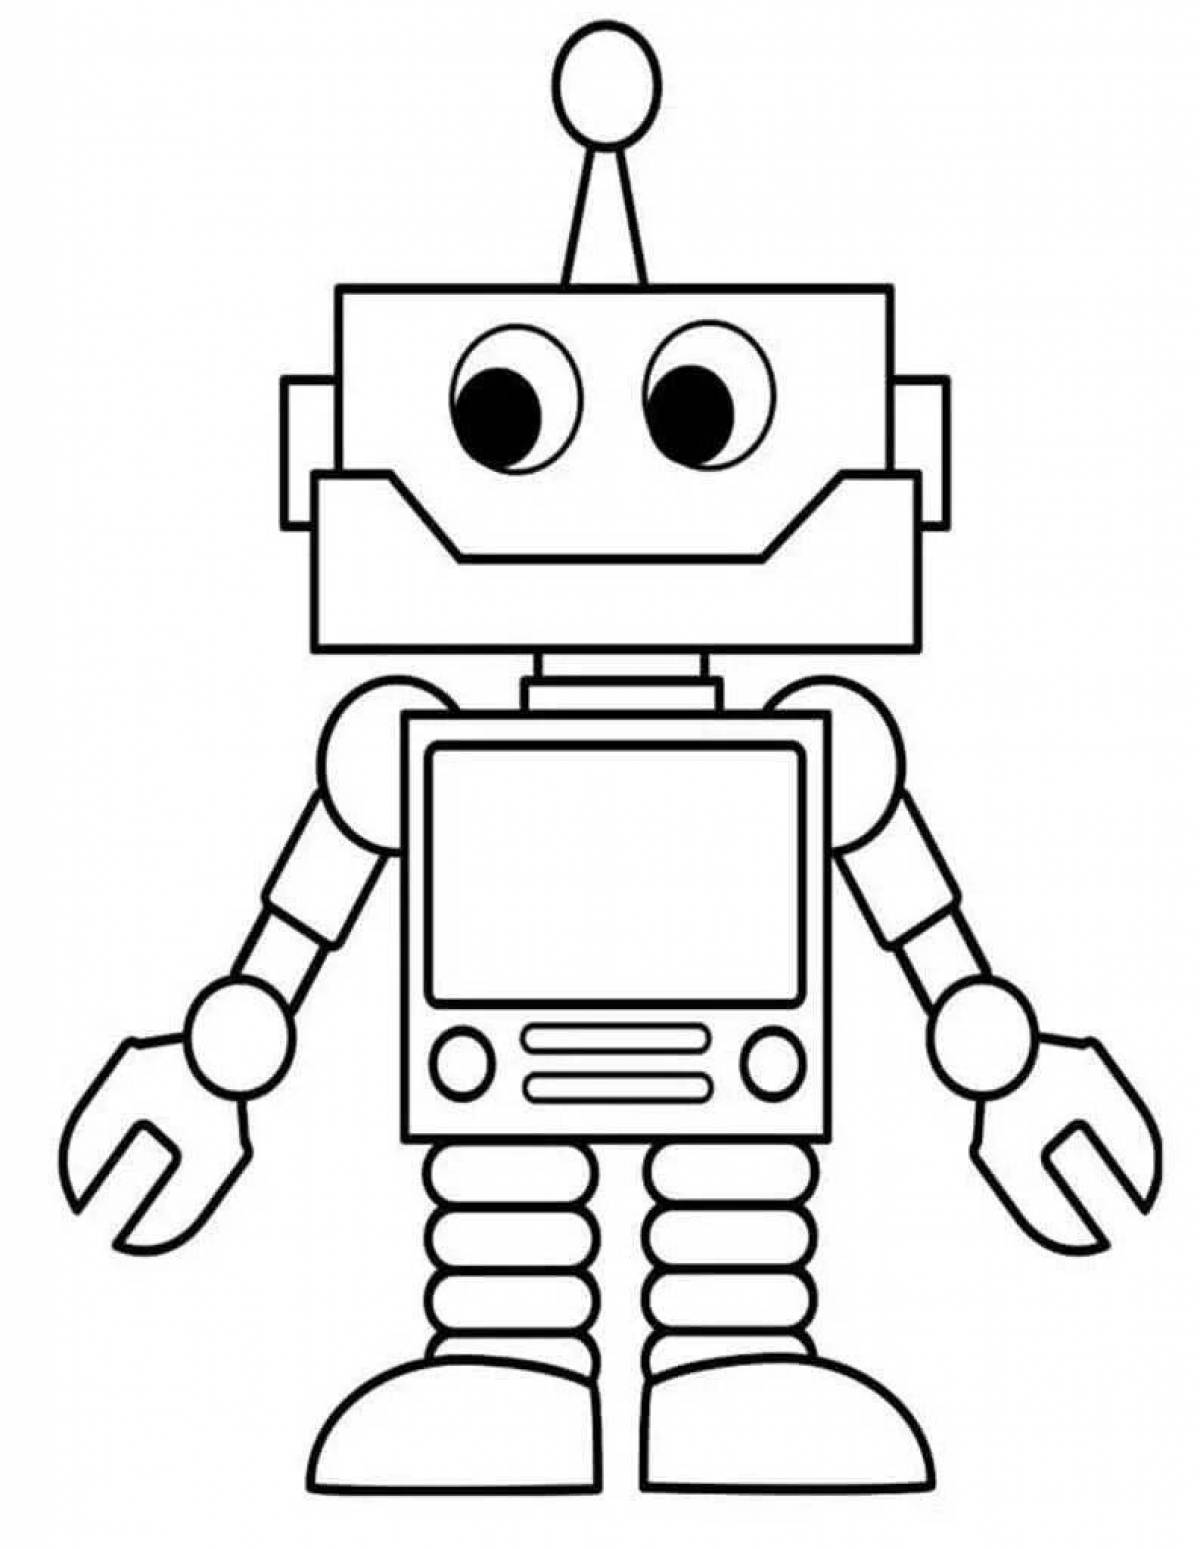 Fairytale robots coloring book for boys 5-6 years old